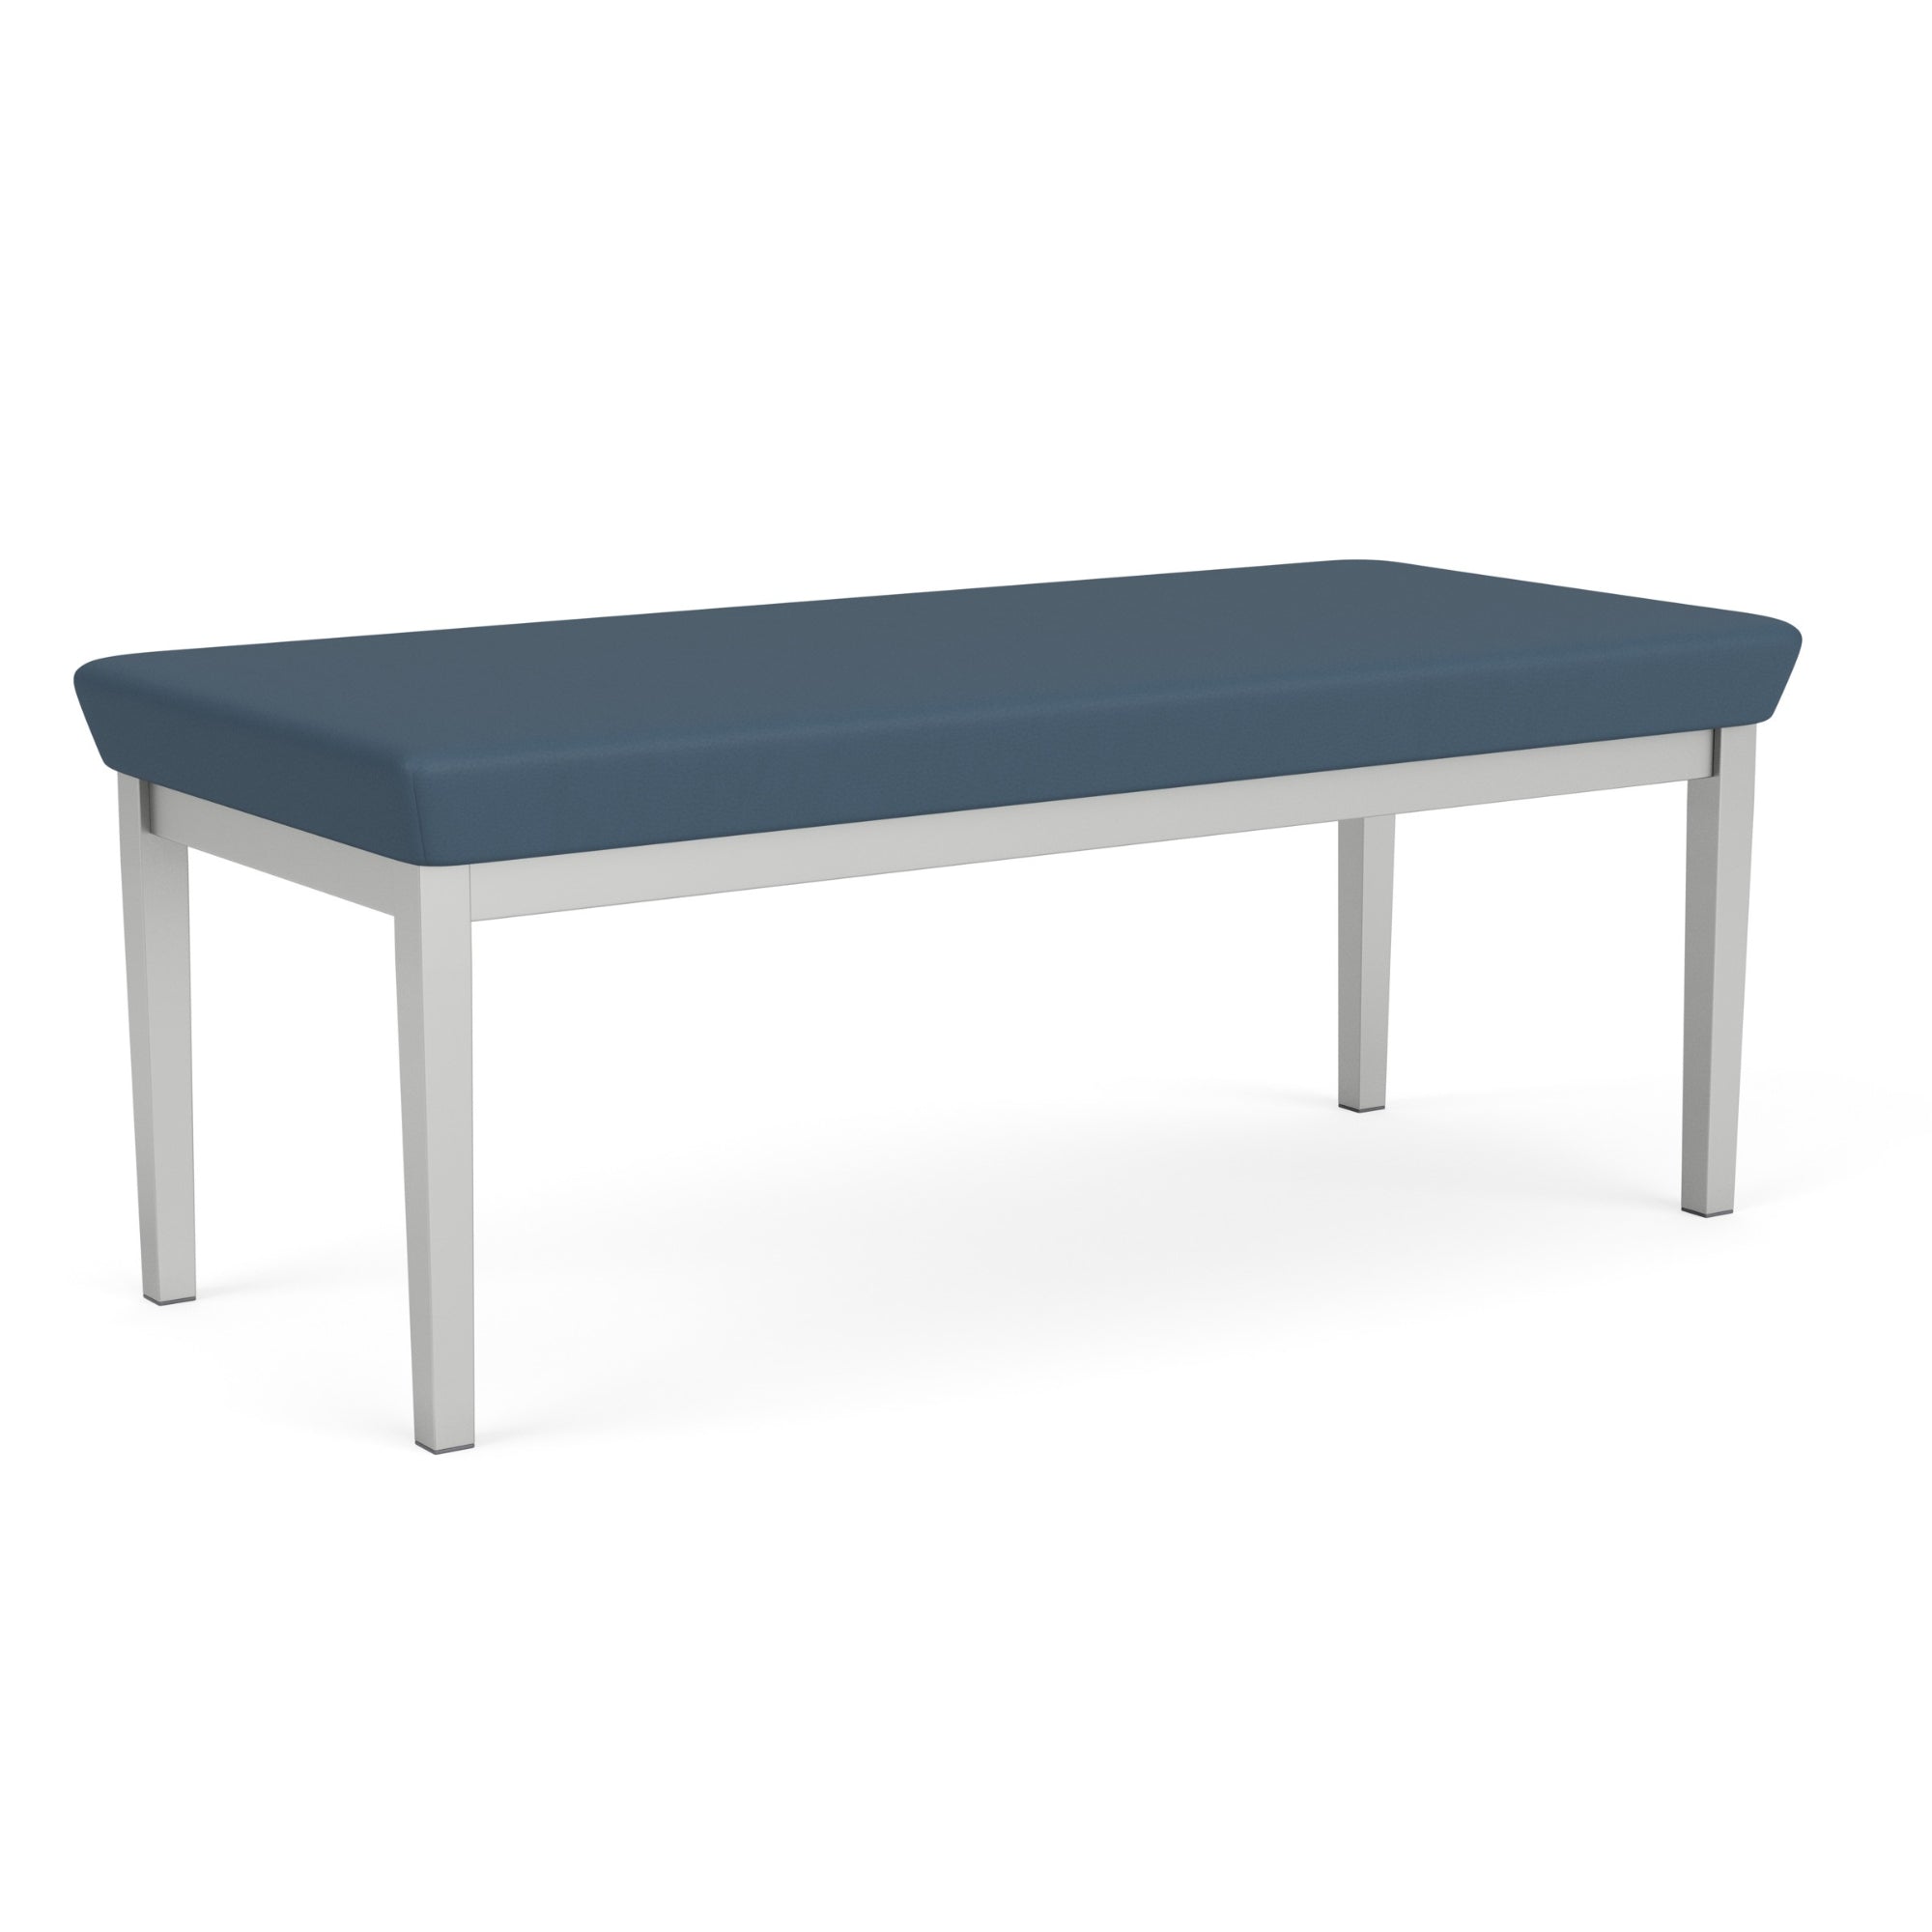 Lenox Steel Collection Reception Seating, 2 Seat Bench, Standard Fabric Upholstery, FREE SHIPPING